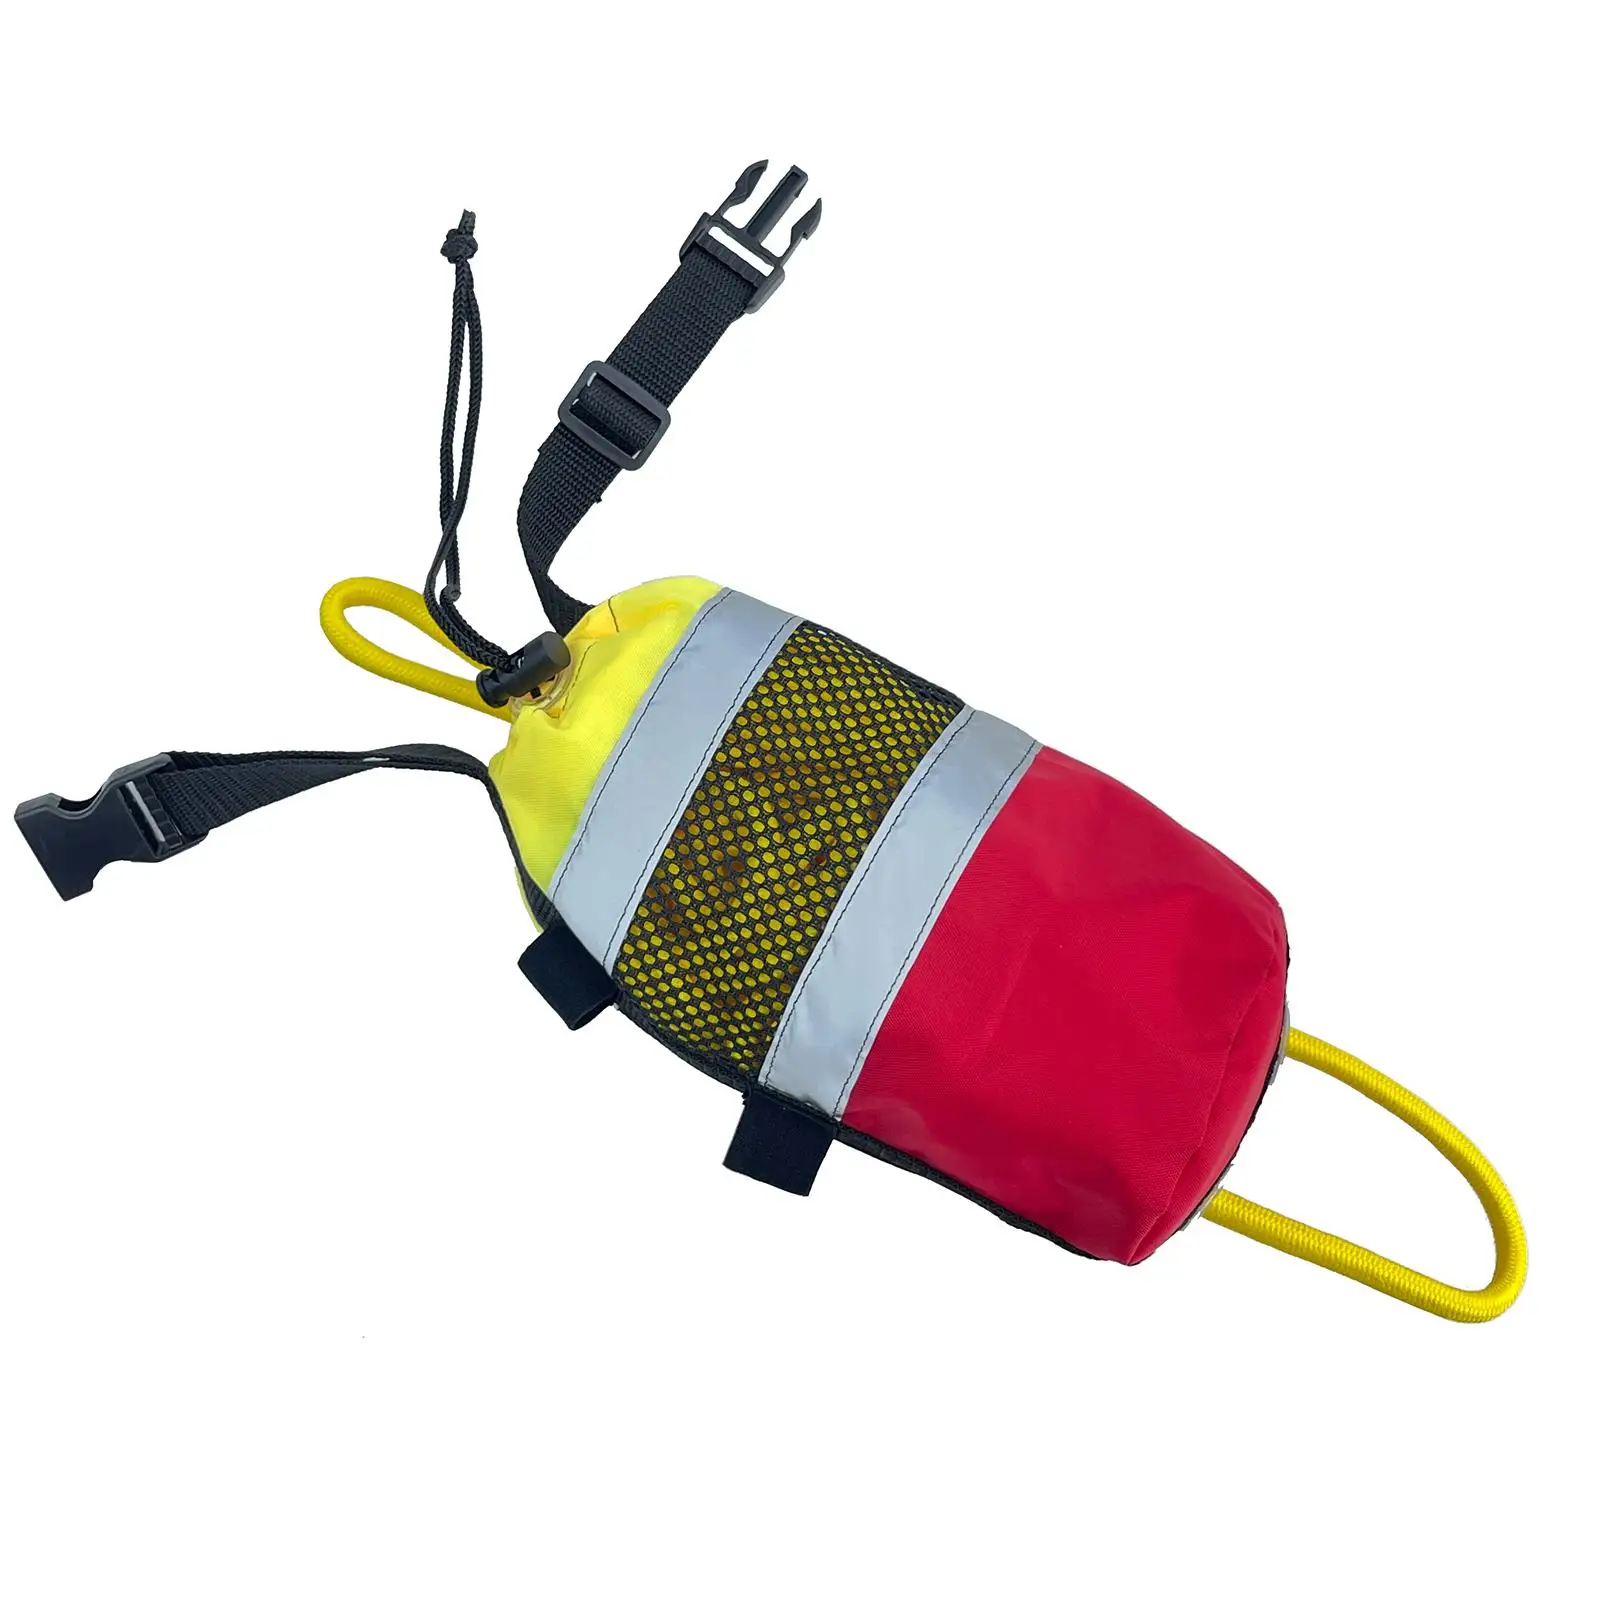 Throwable Throw Bag High Visibility Reflective Throw Rope Boater`s Throw Bag for Water Sports Fishing Kayak Rafting Boat